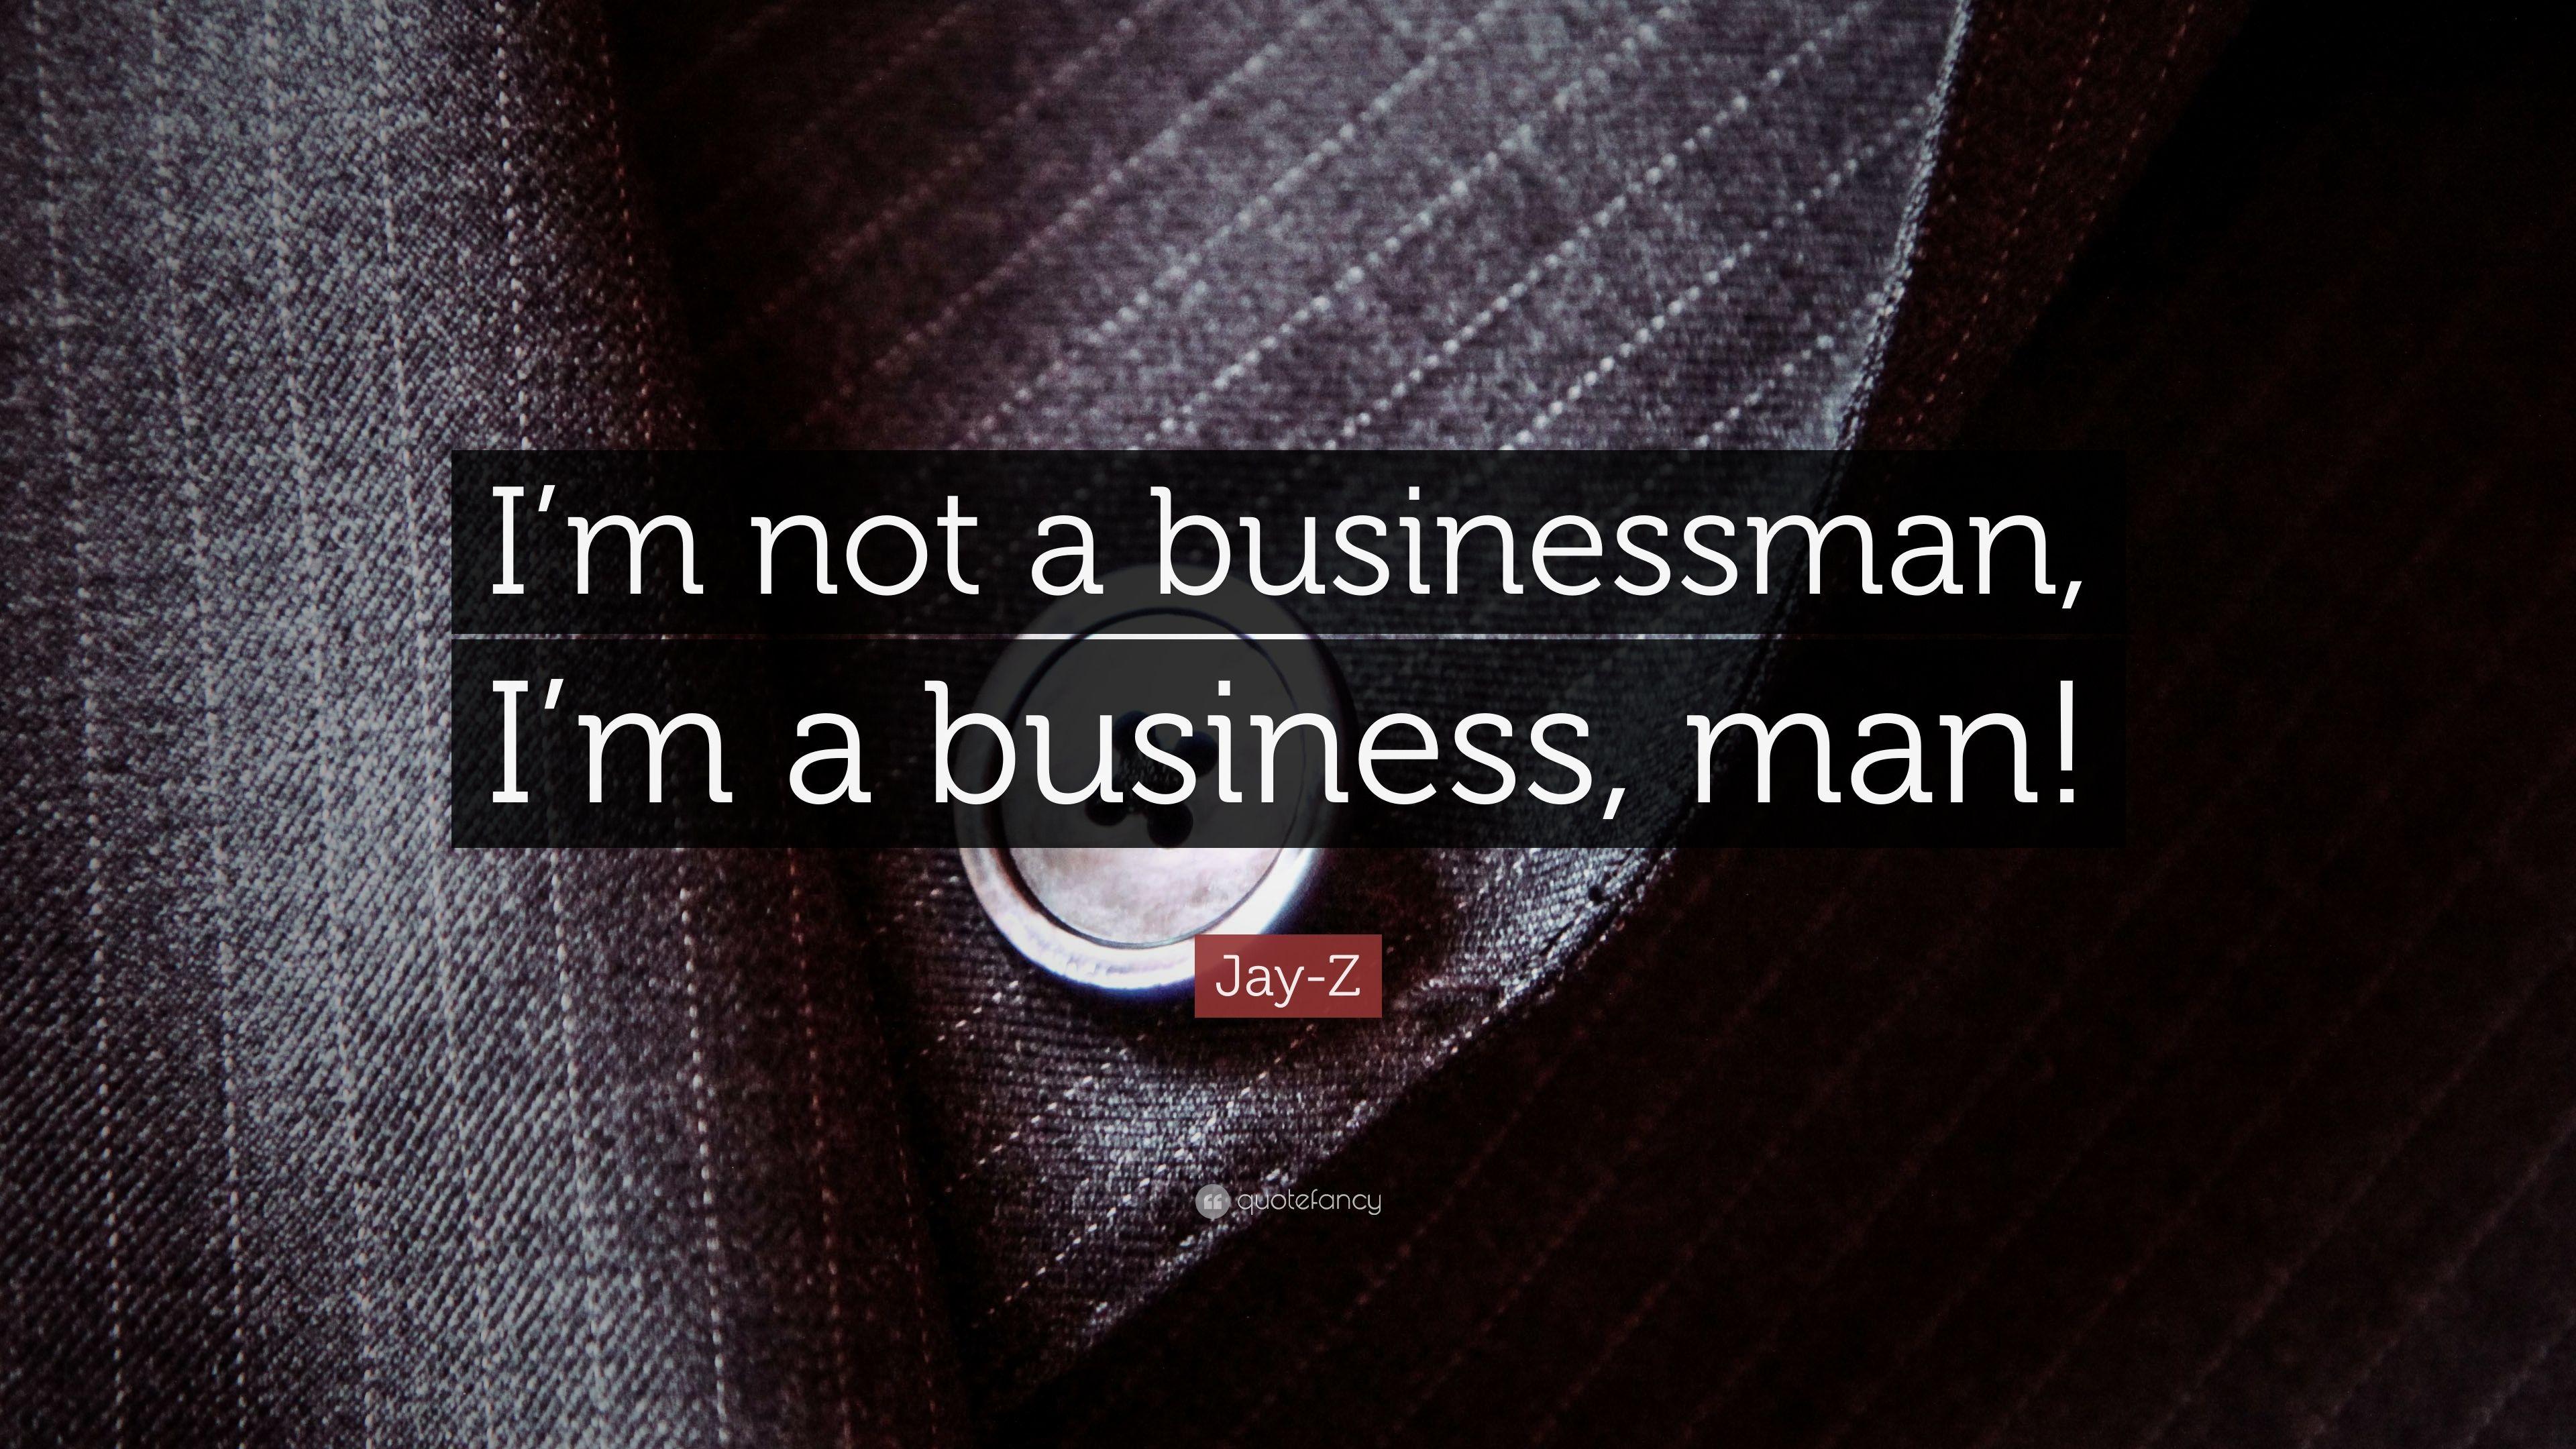 Jay Z Quote: “I'm Not A Businessman, I'm A Business, Man!” 7